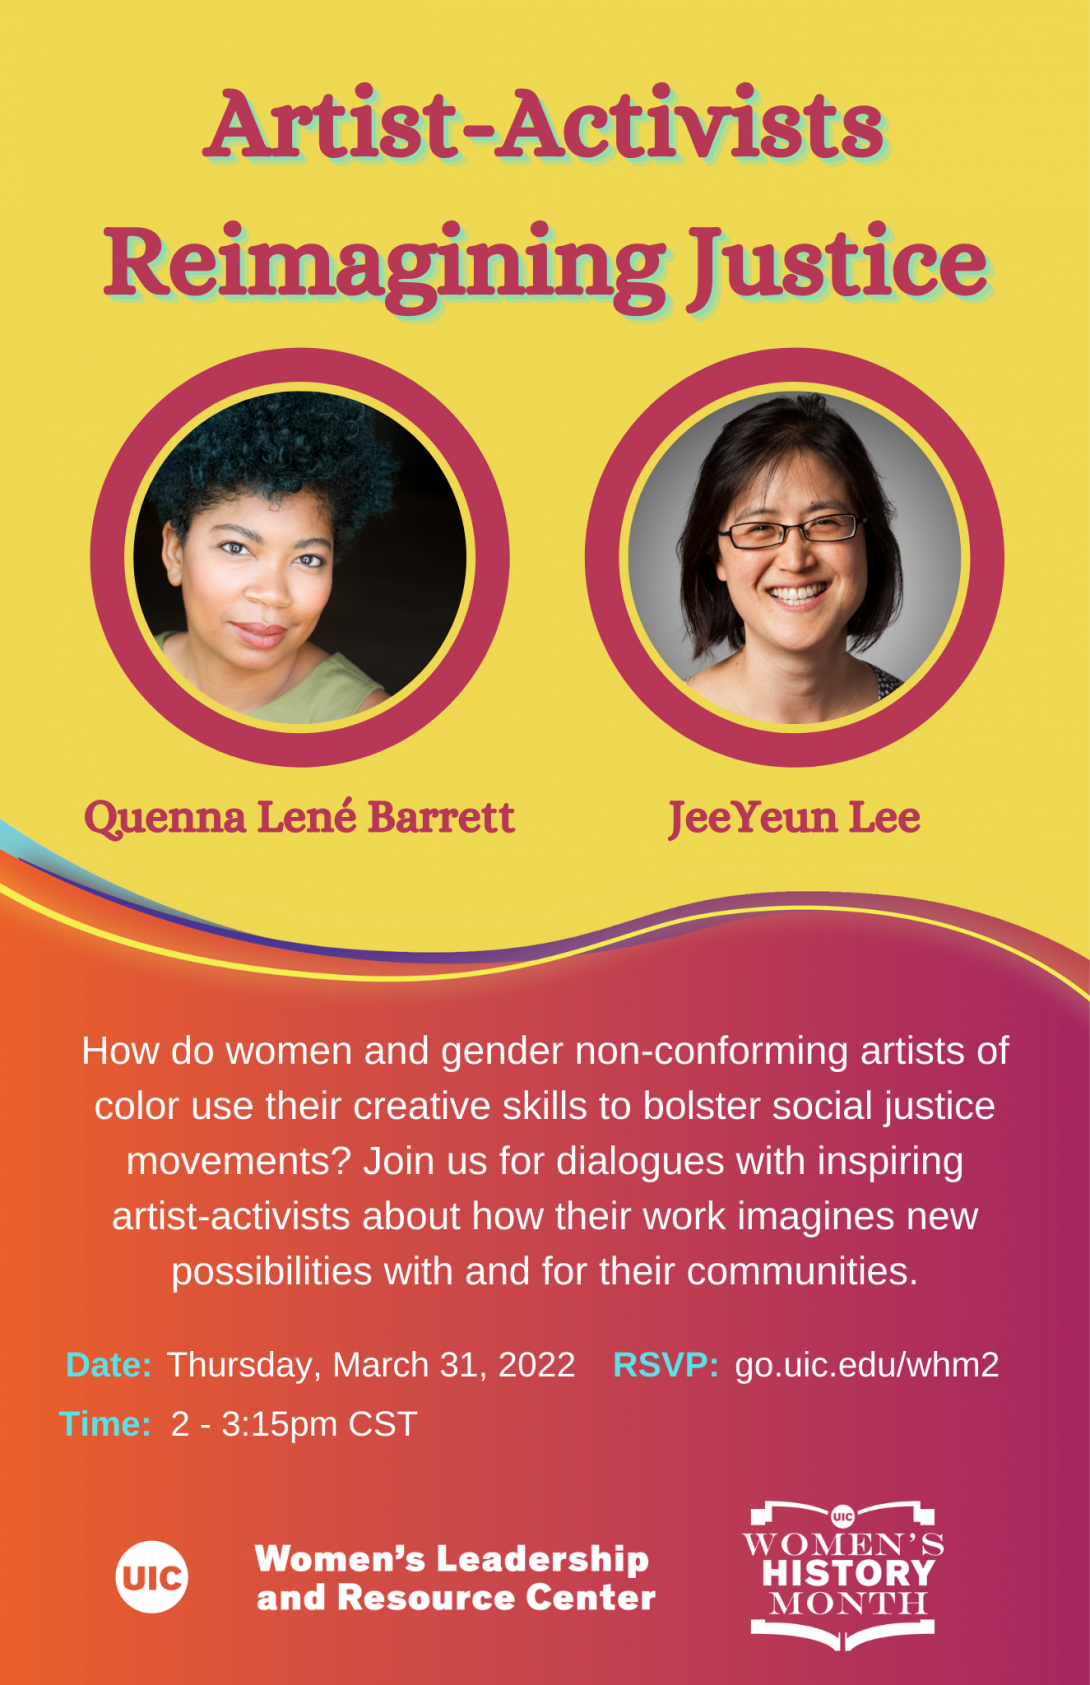 Headshots of Quenna Lené Barrett and JeeYeun Lee, on a yellow background. The event title appears in magenta text at the top. Below the speaker photos are the date, time, and RSVP link in white and blue text on an orange-magenta gradient background, and the WLRC logo.